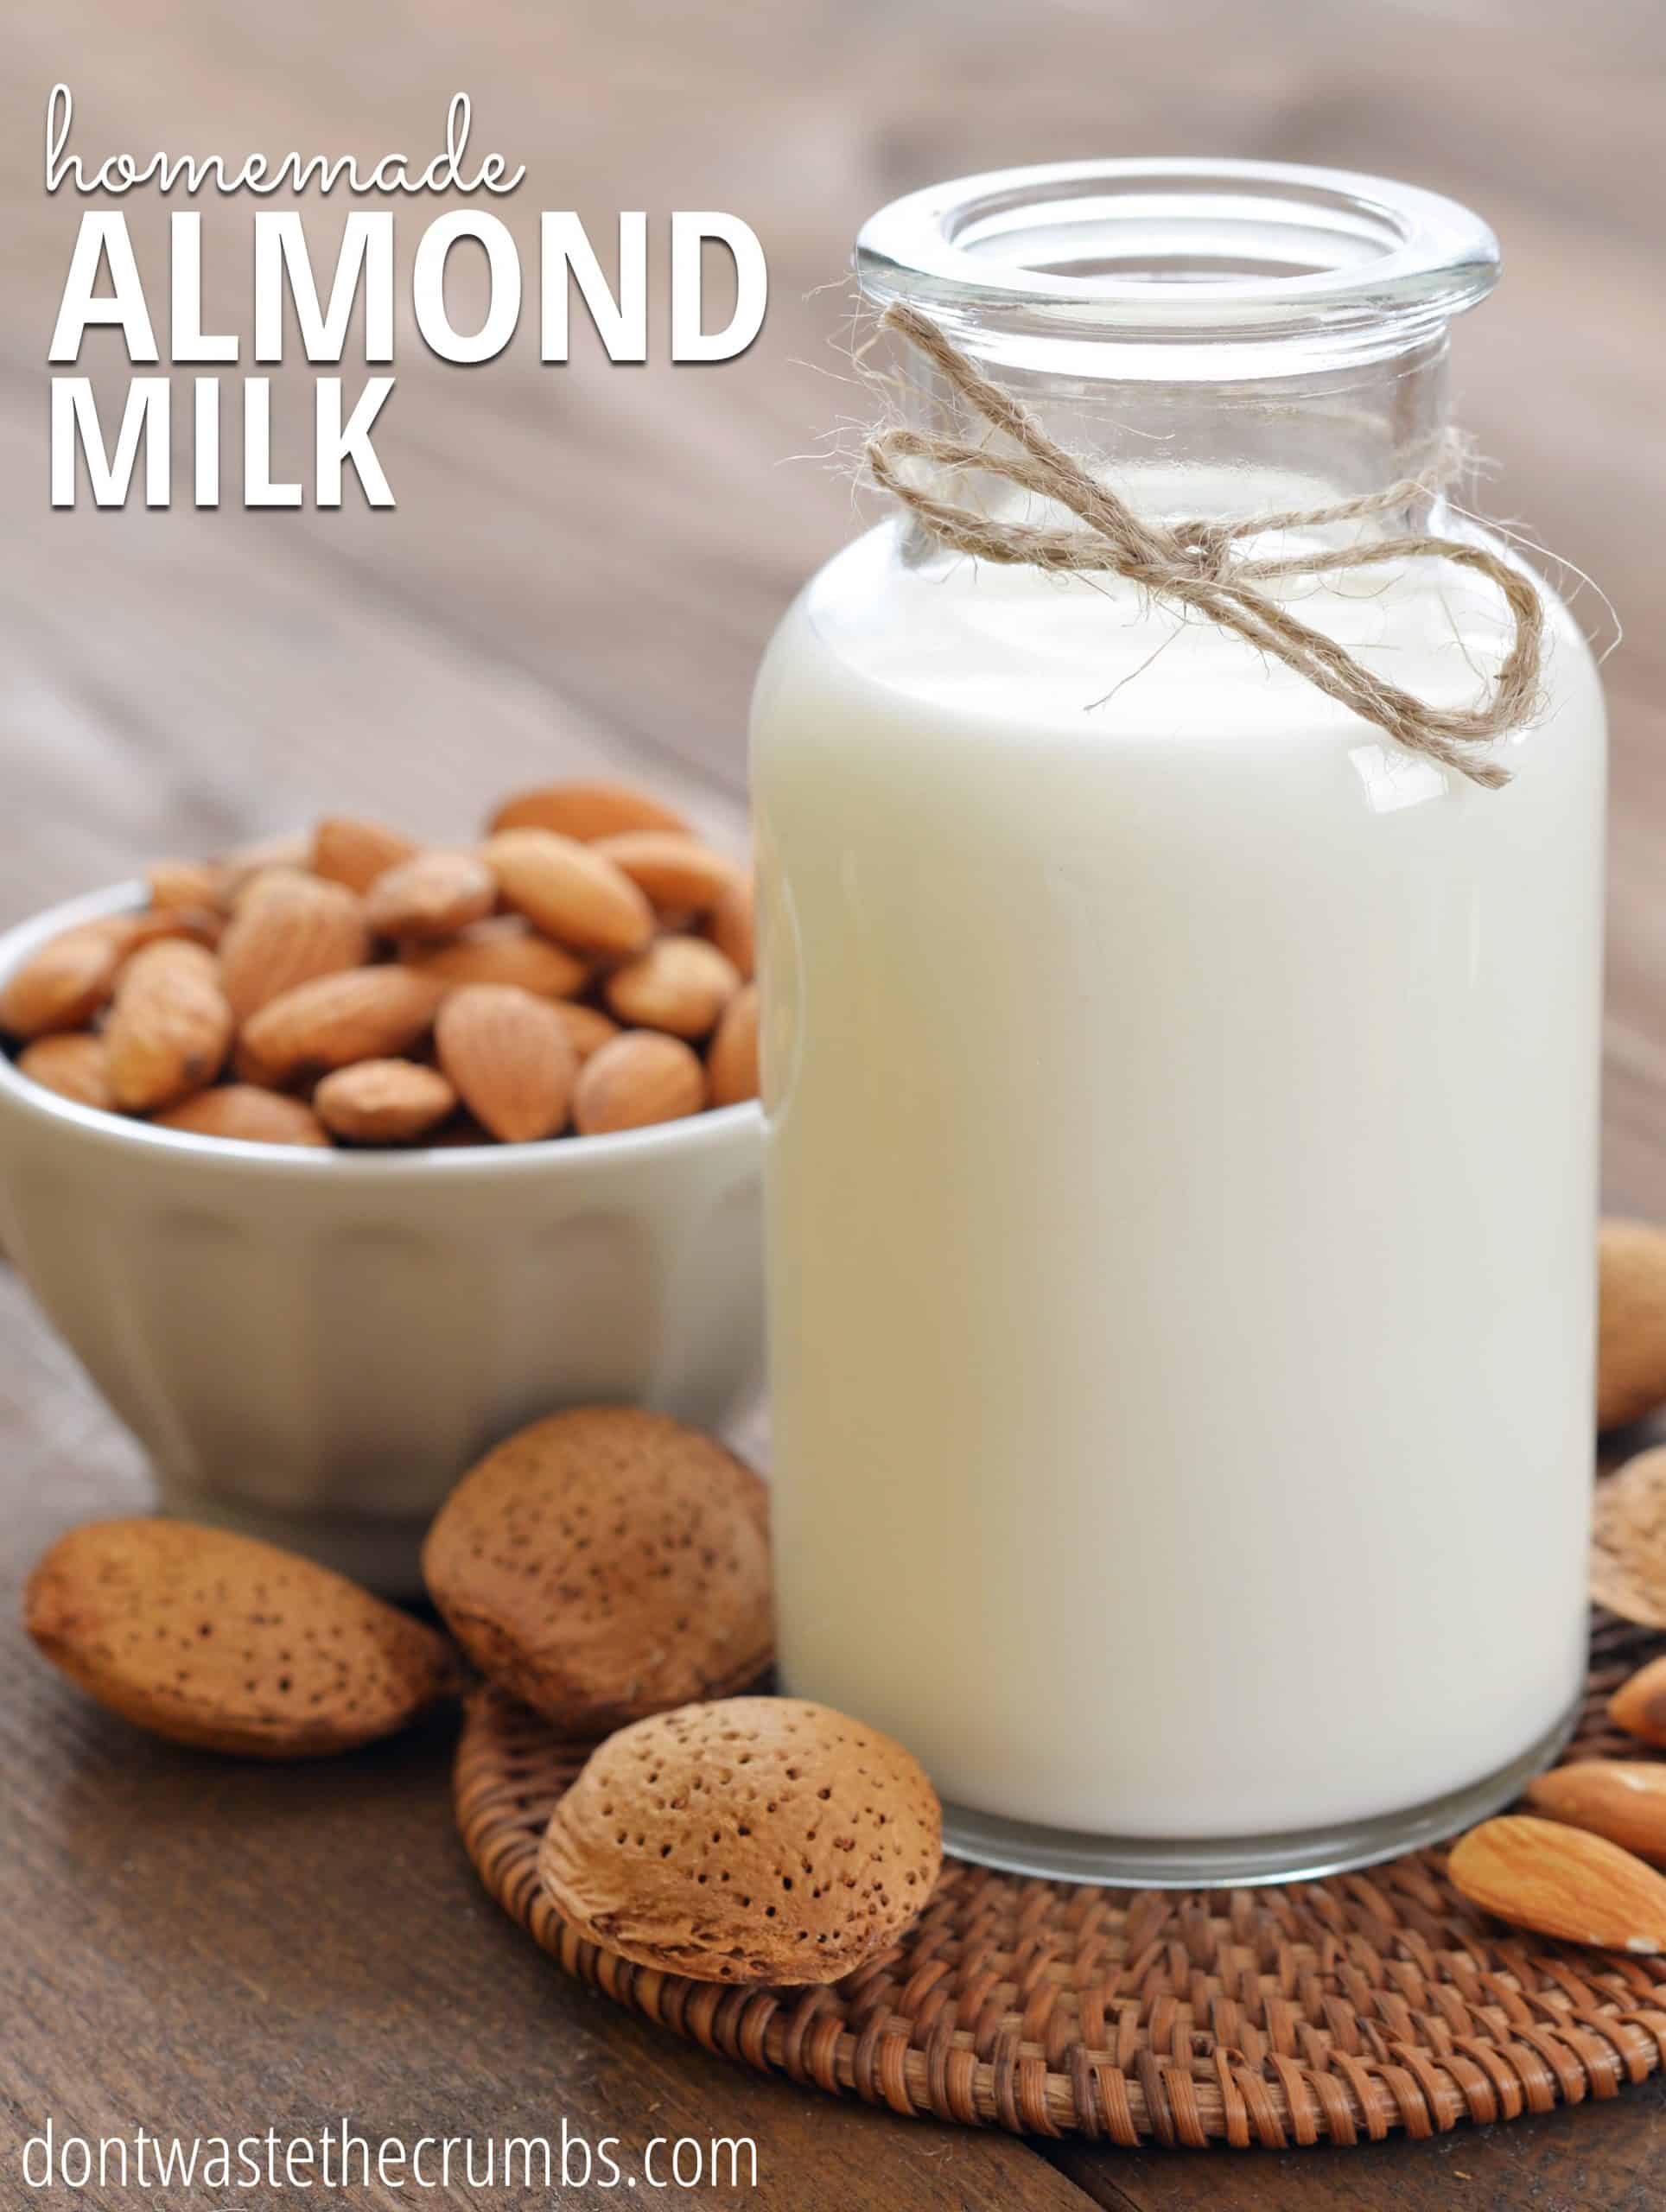 This simple homemade almond milk is one of the best dairy alternatives and it's healthier and less expensive than store-bought! :: dontwastethecrumbs.com